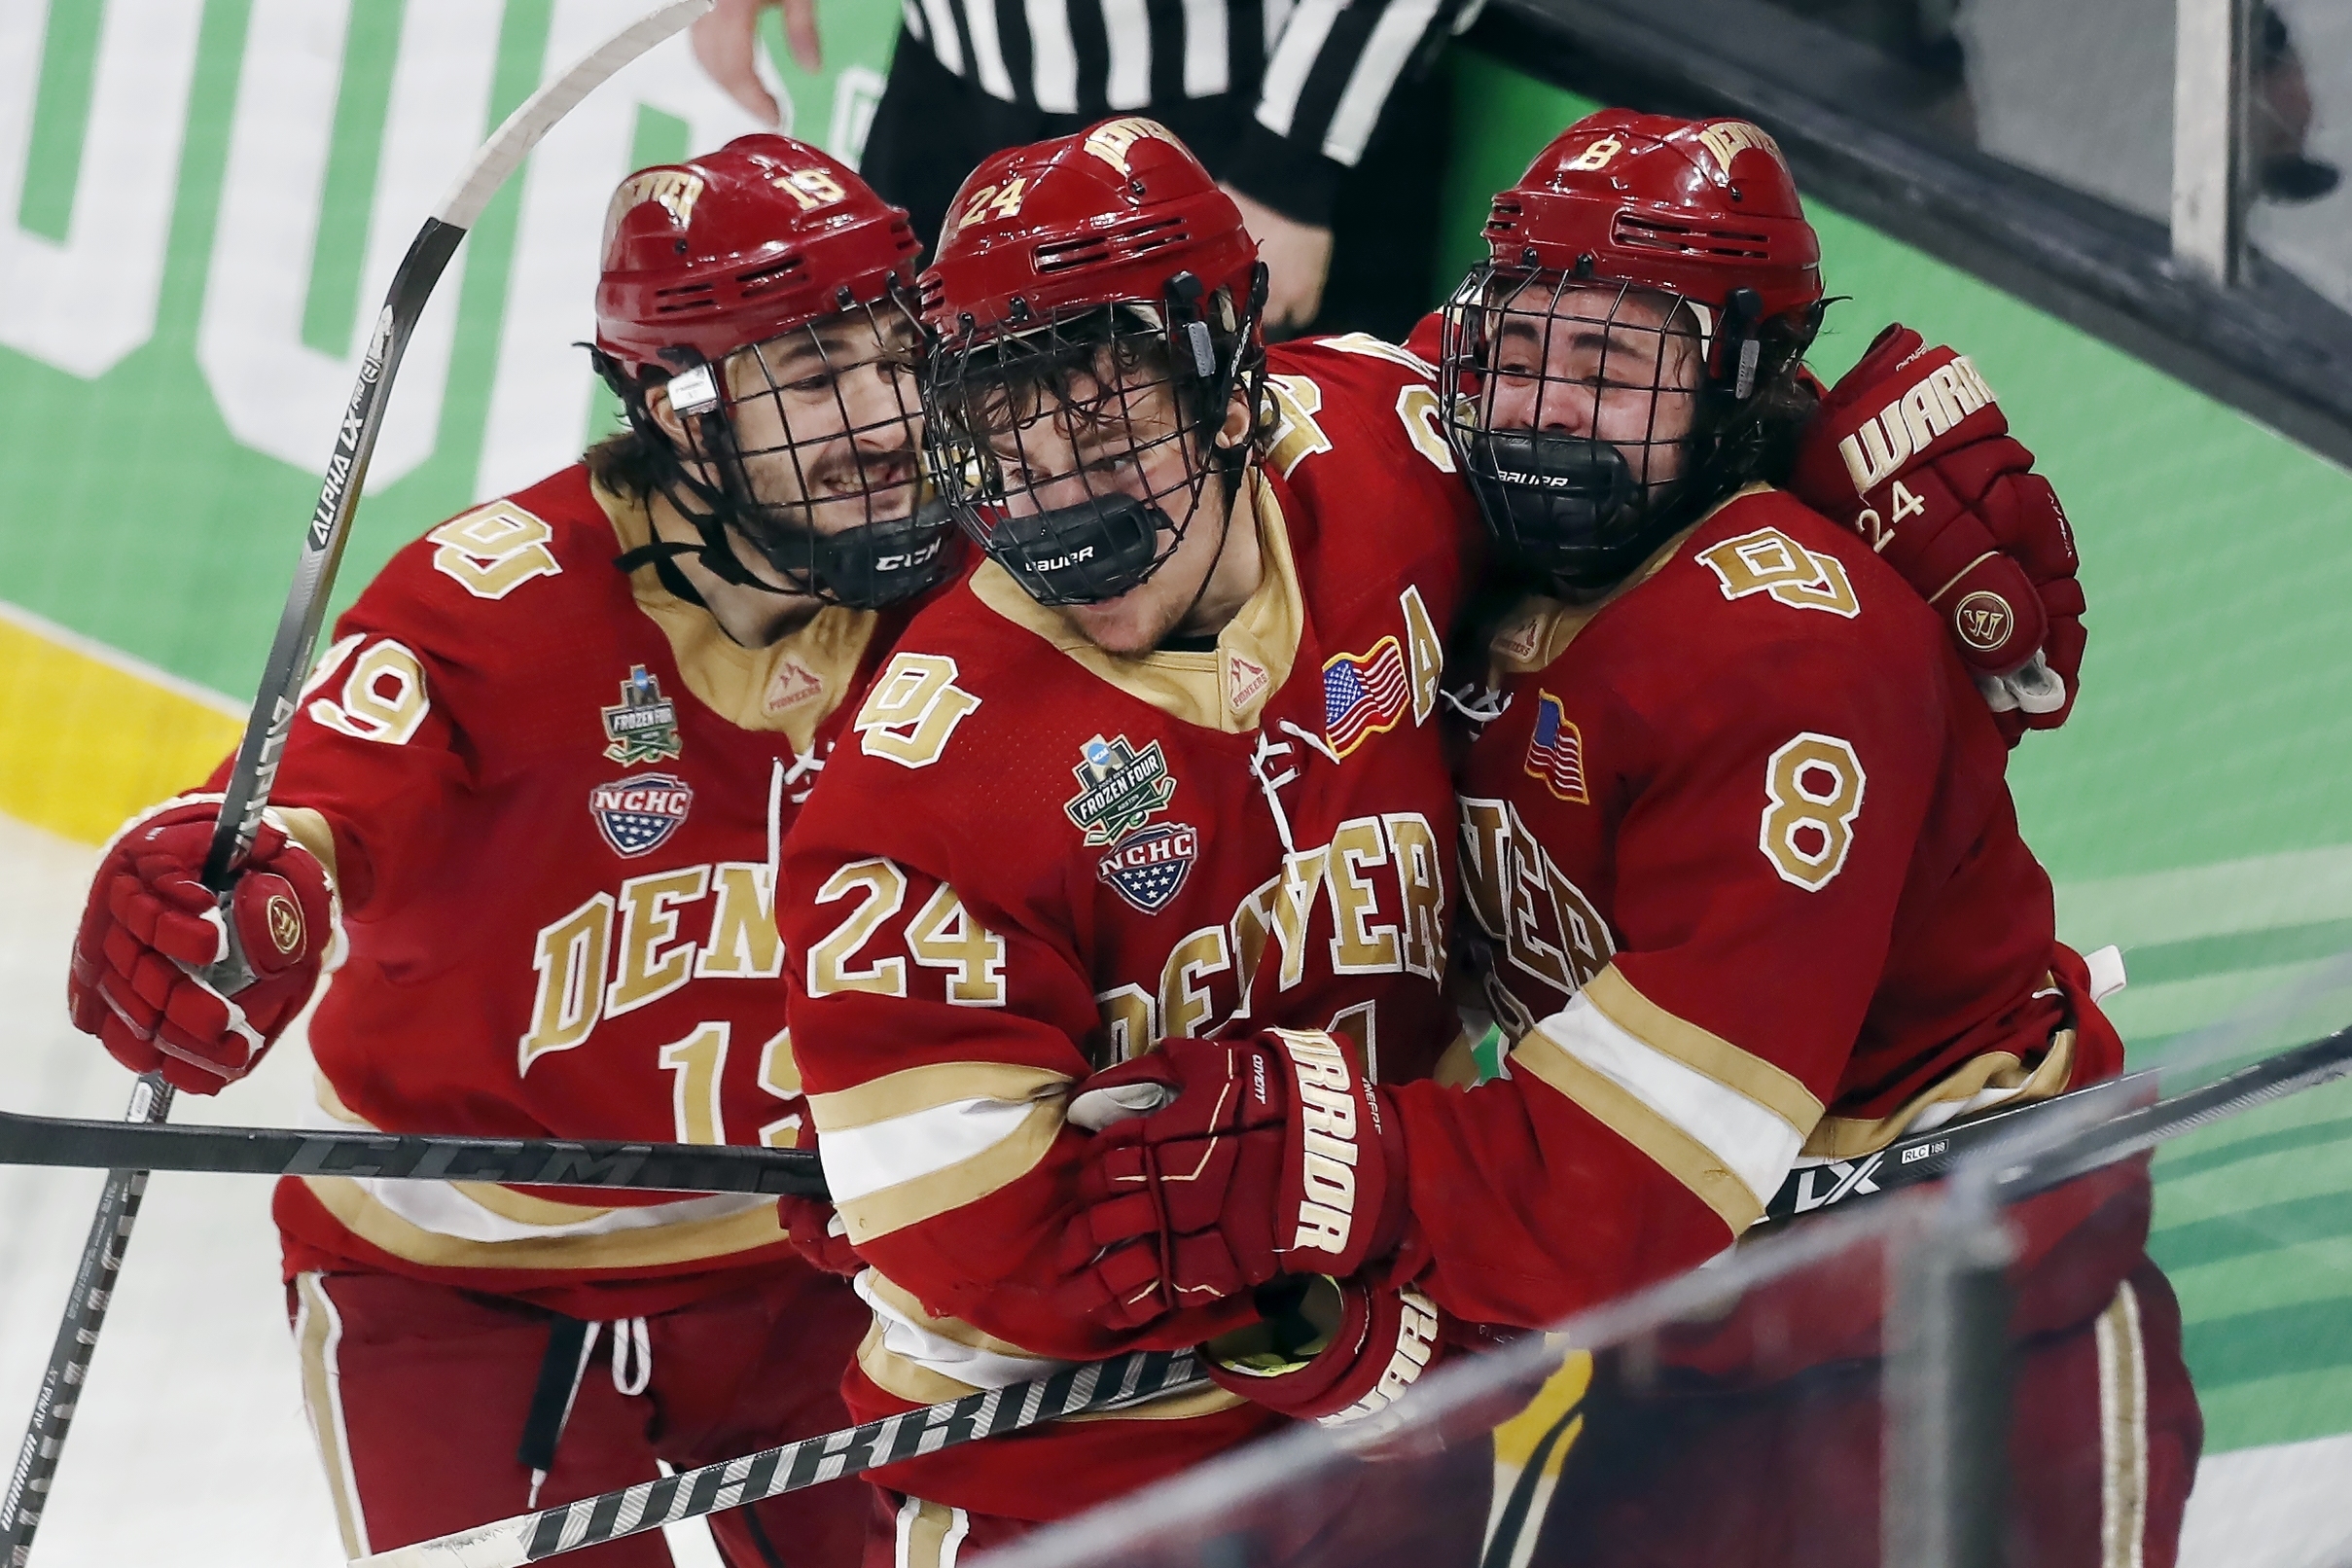 How to watch the NCAA Hockey Tournament championship Denver vs